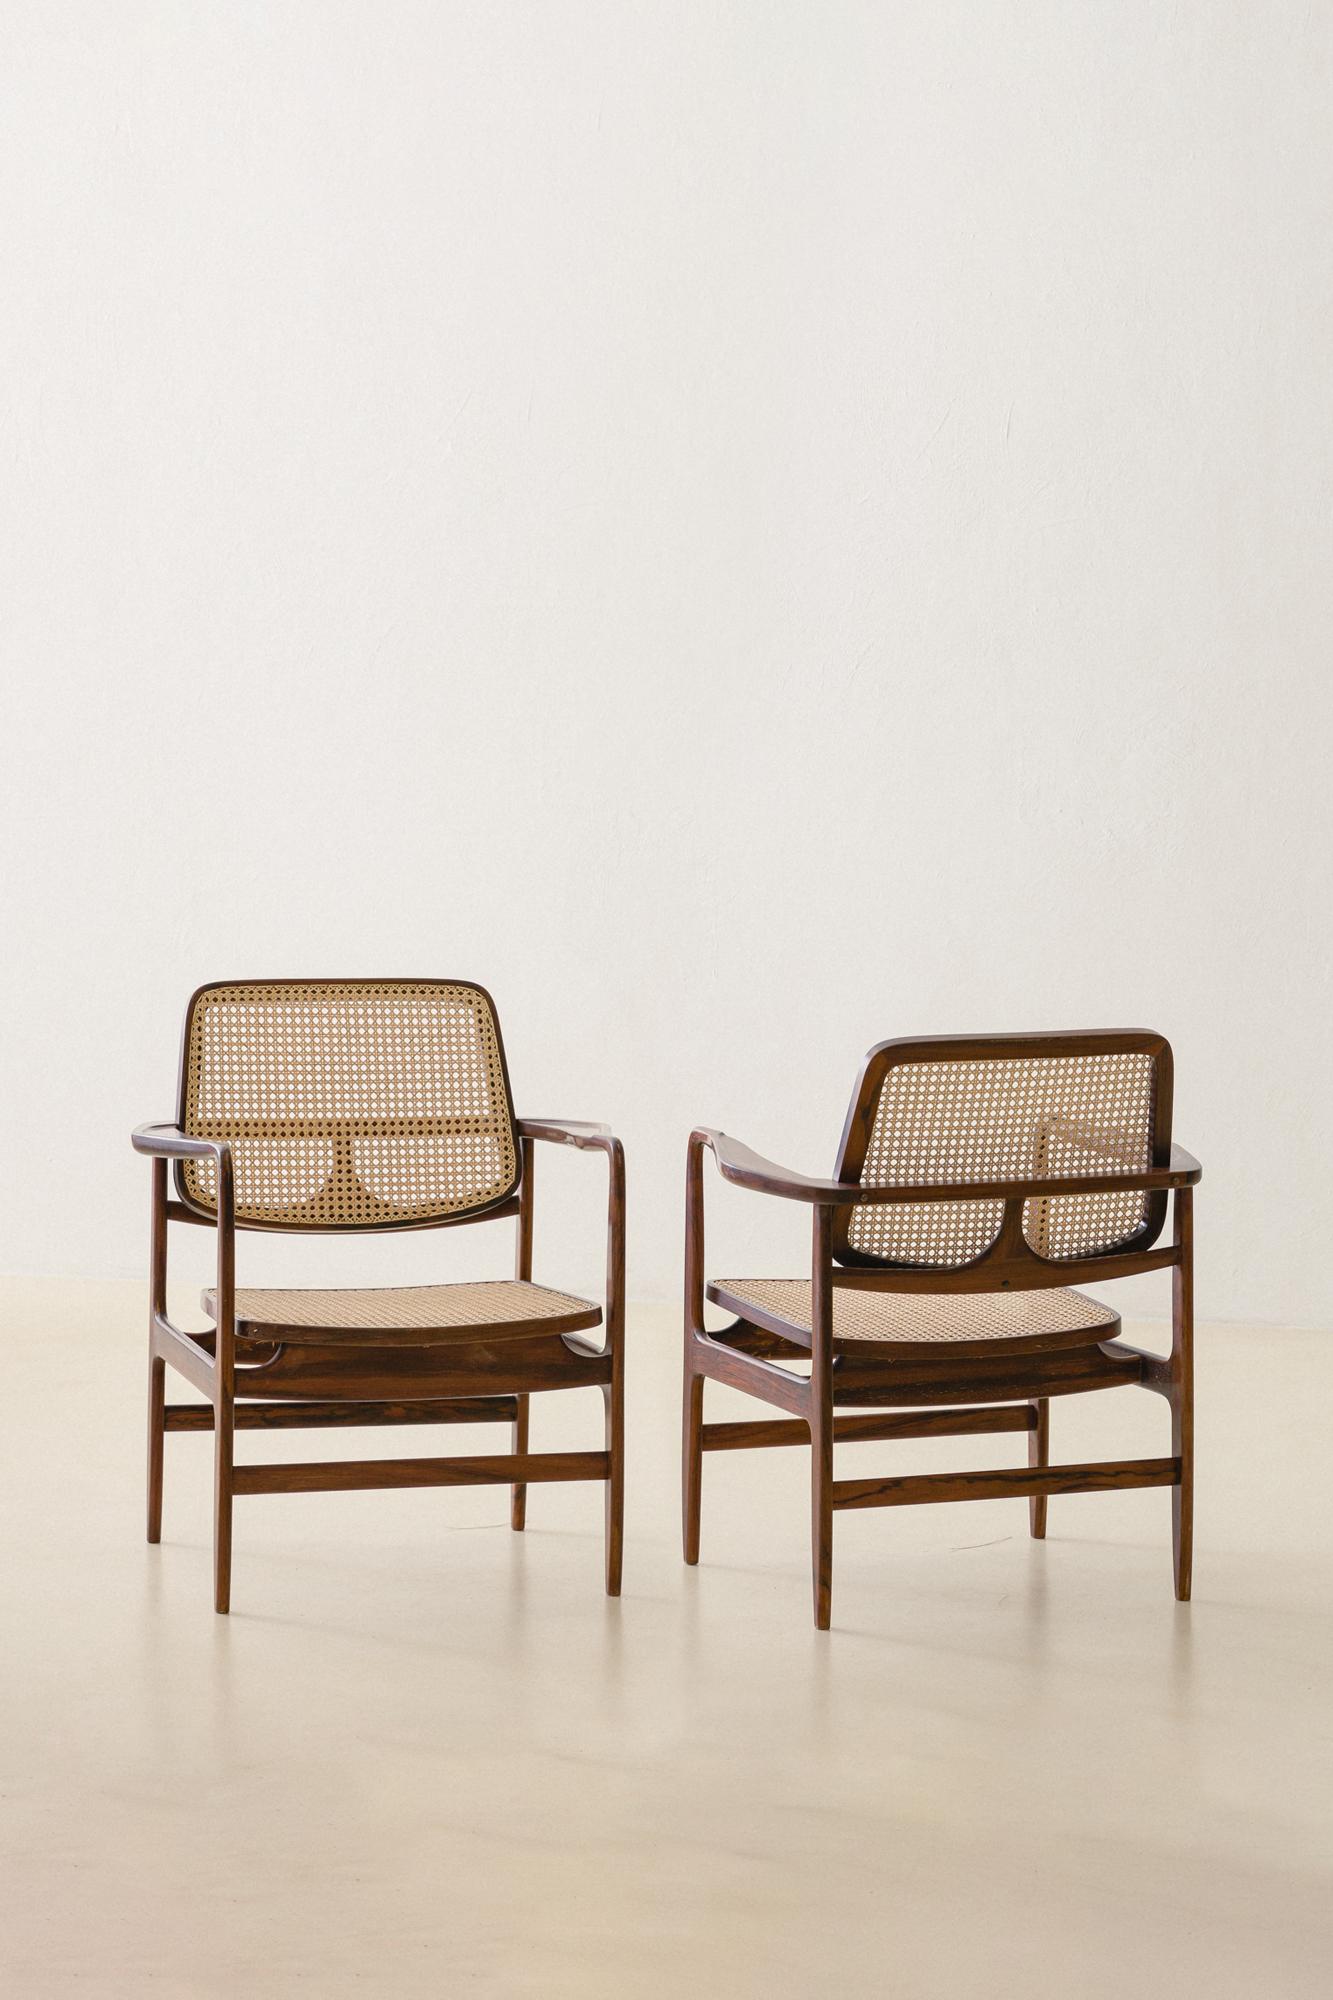 Pair of Vintage Oscar Armchairs by Sergio Rodrigues, 1956, Brazilian Midcentury 2